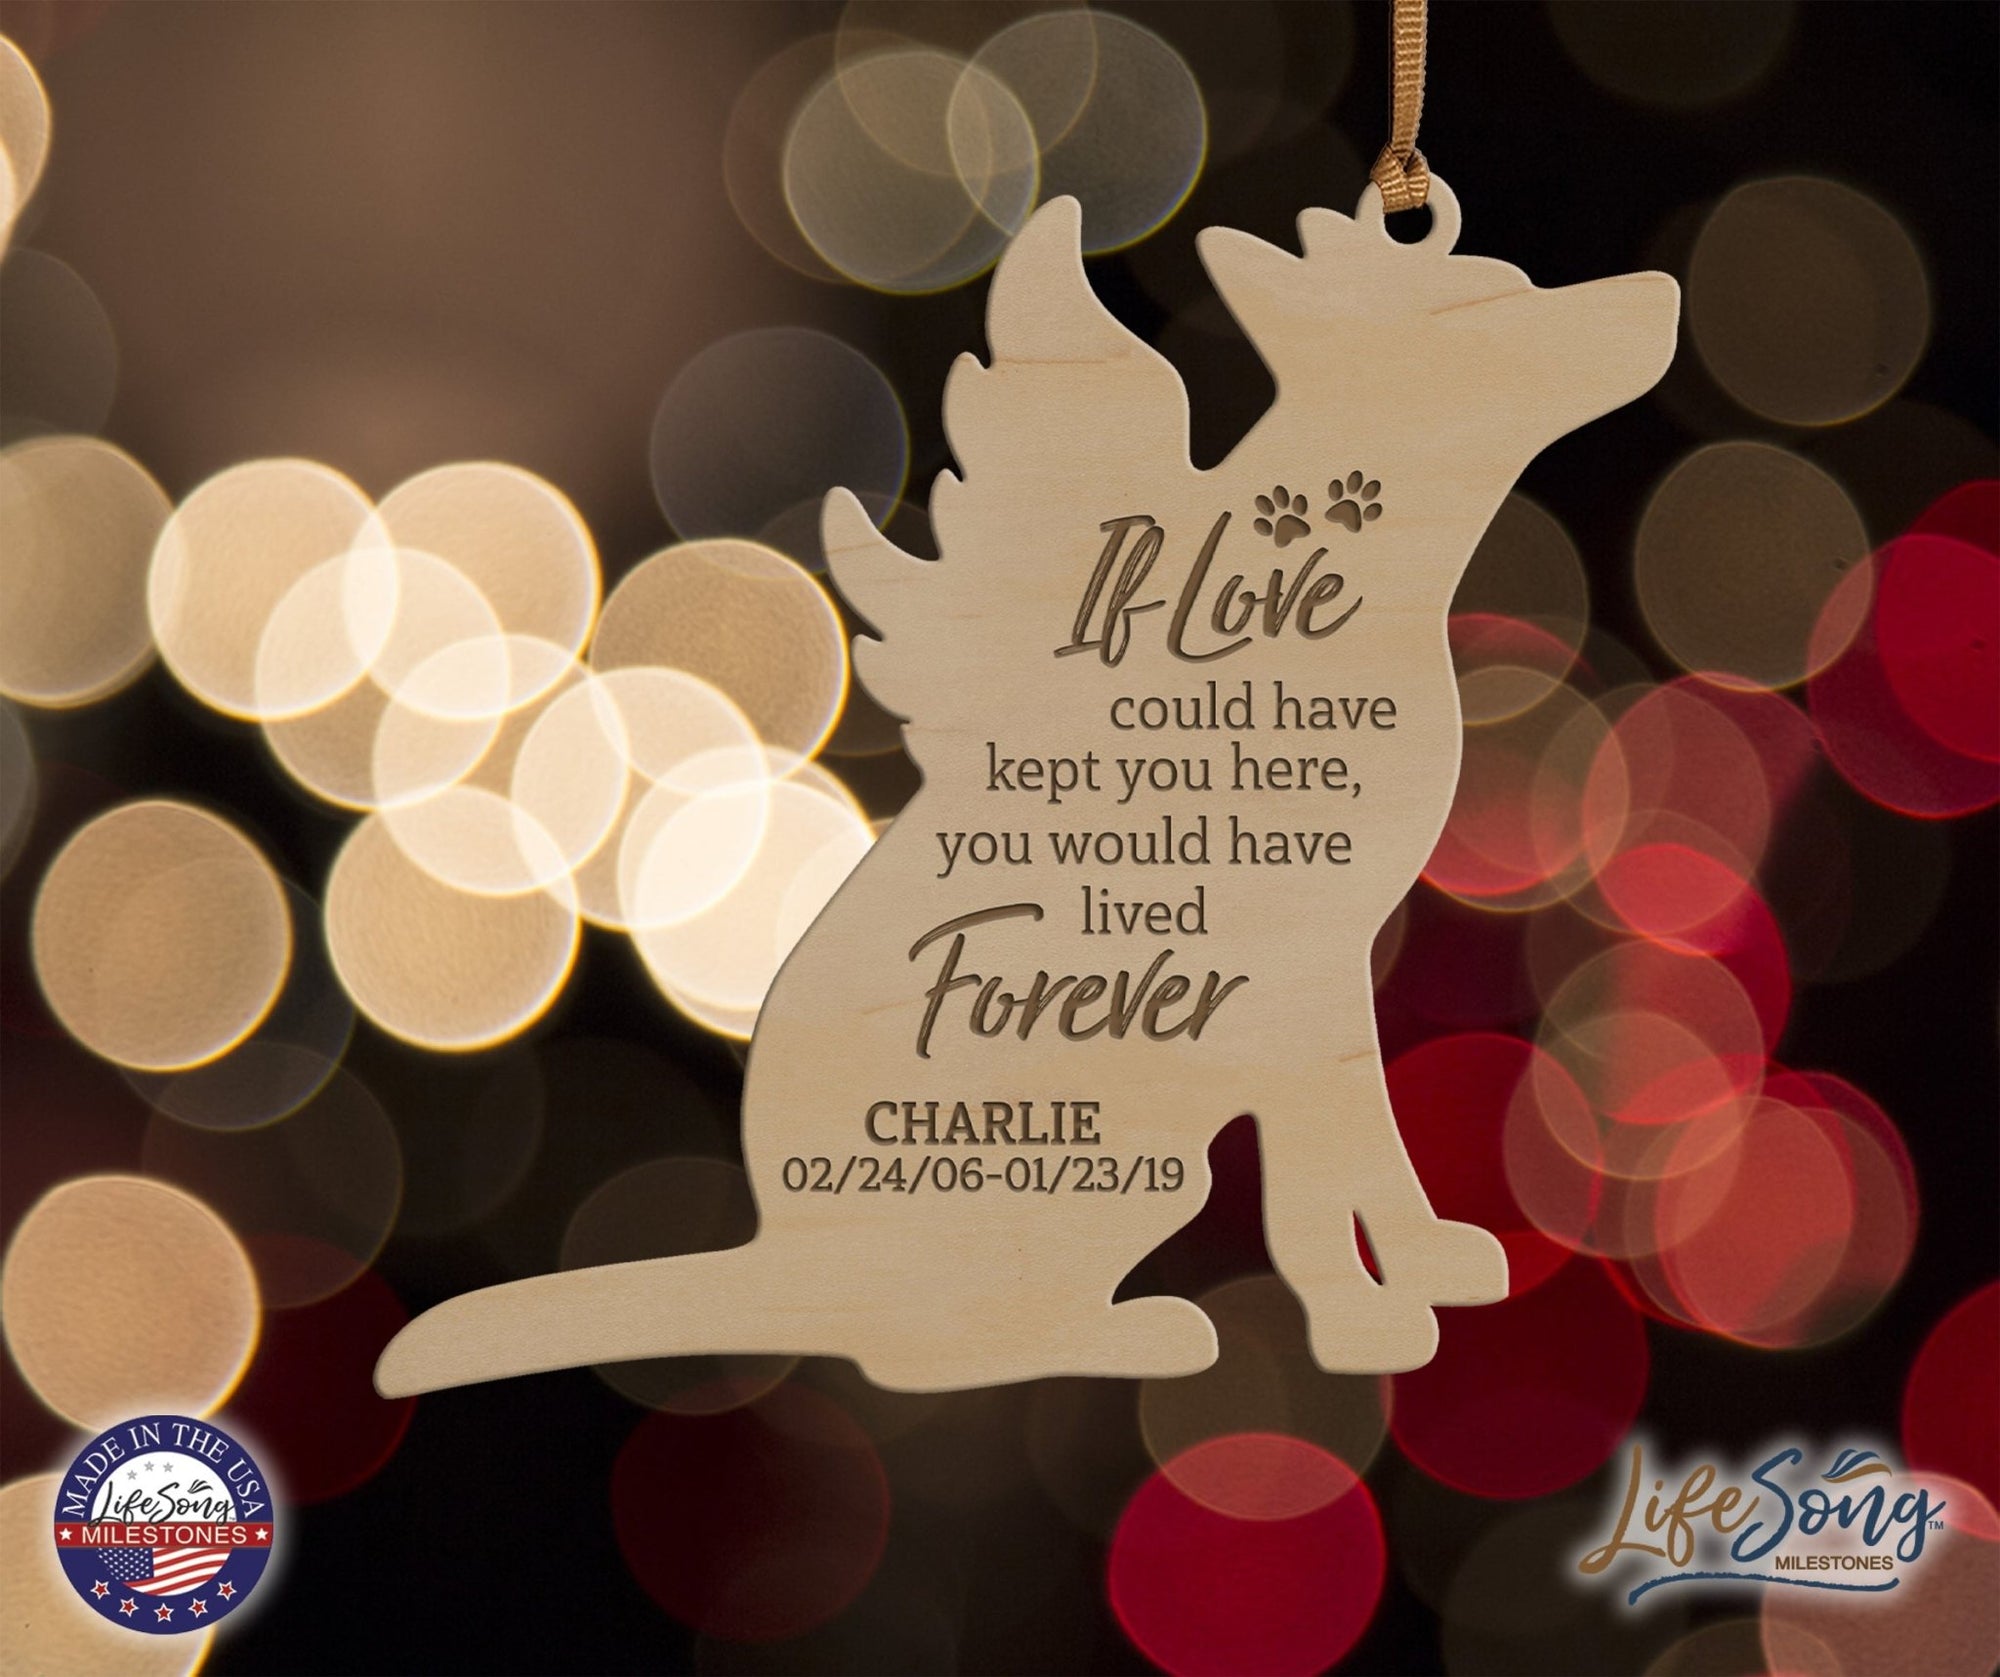 Personalized Engraved Memorial Dog Ornament 4.9375” x 5.375” x 0.125” - If love could have kept you here (PAWS) - LifeSong Milestones